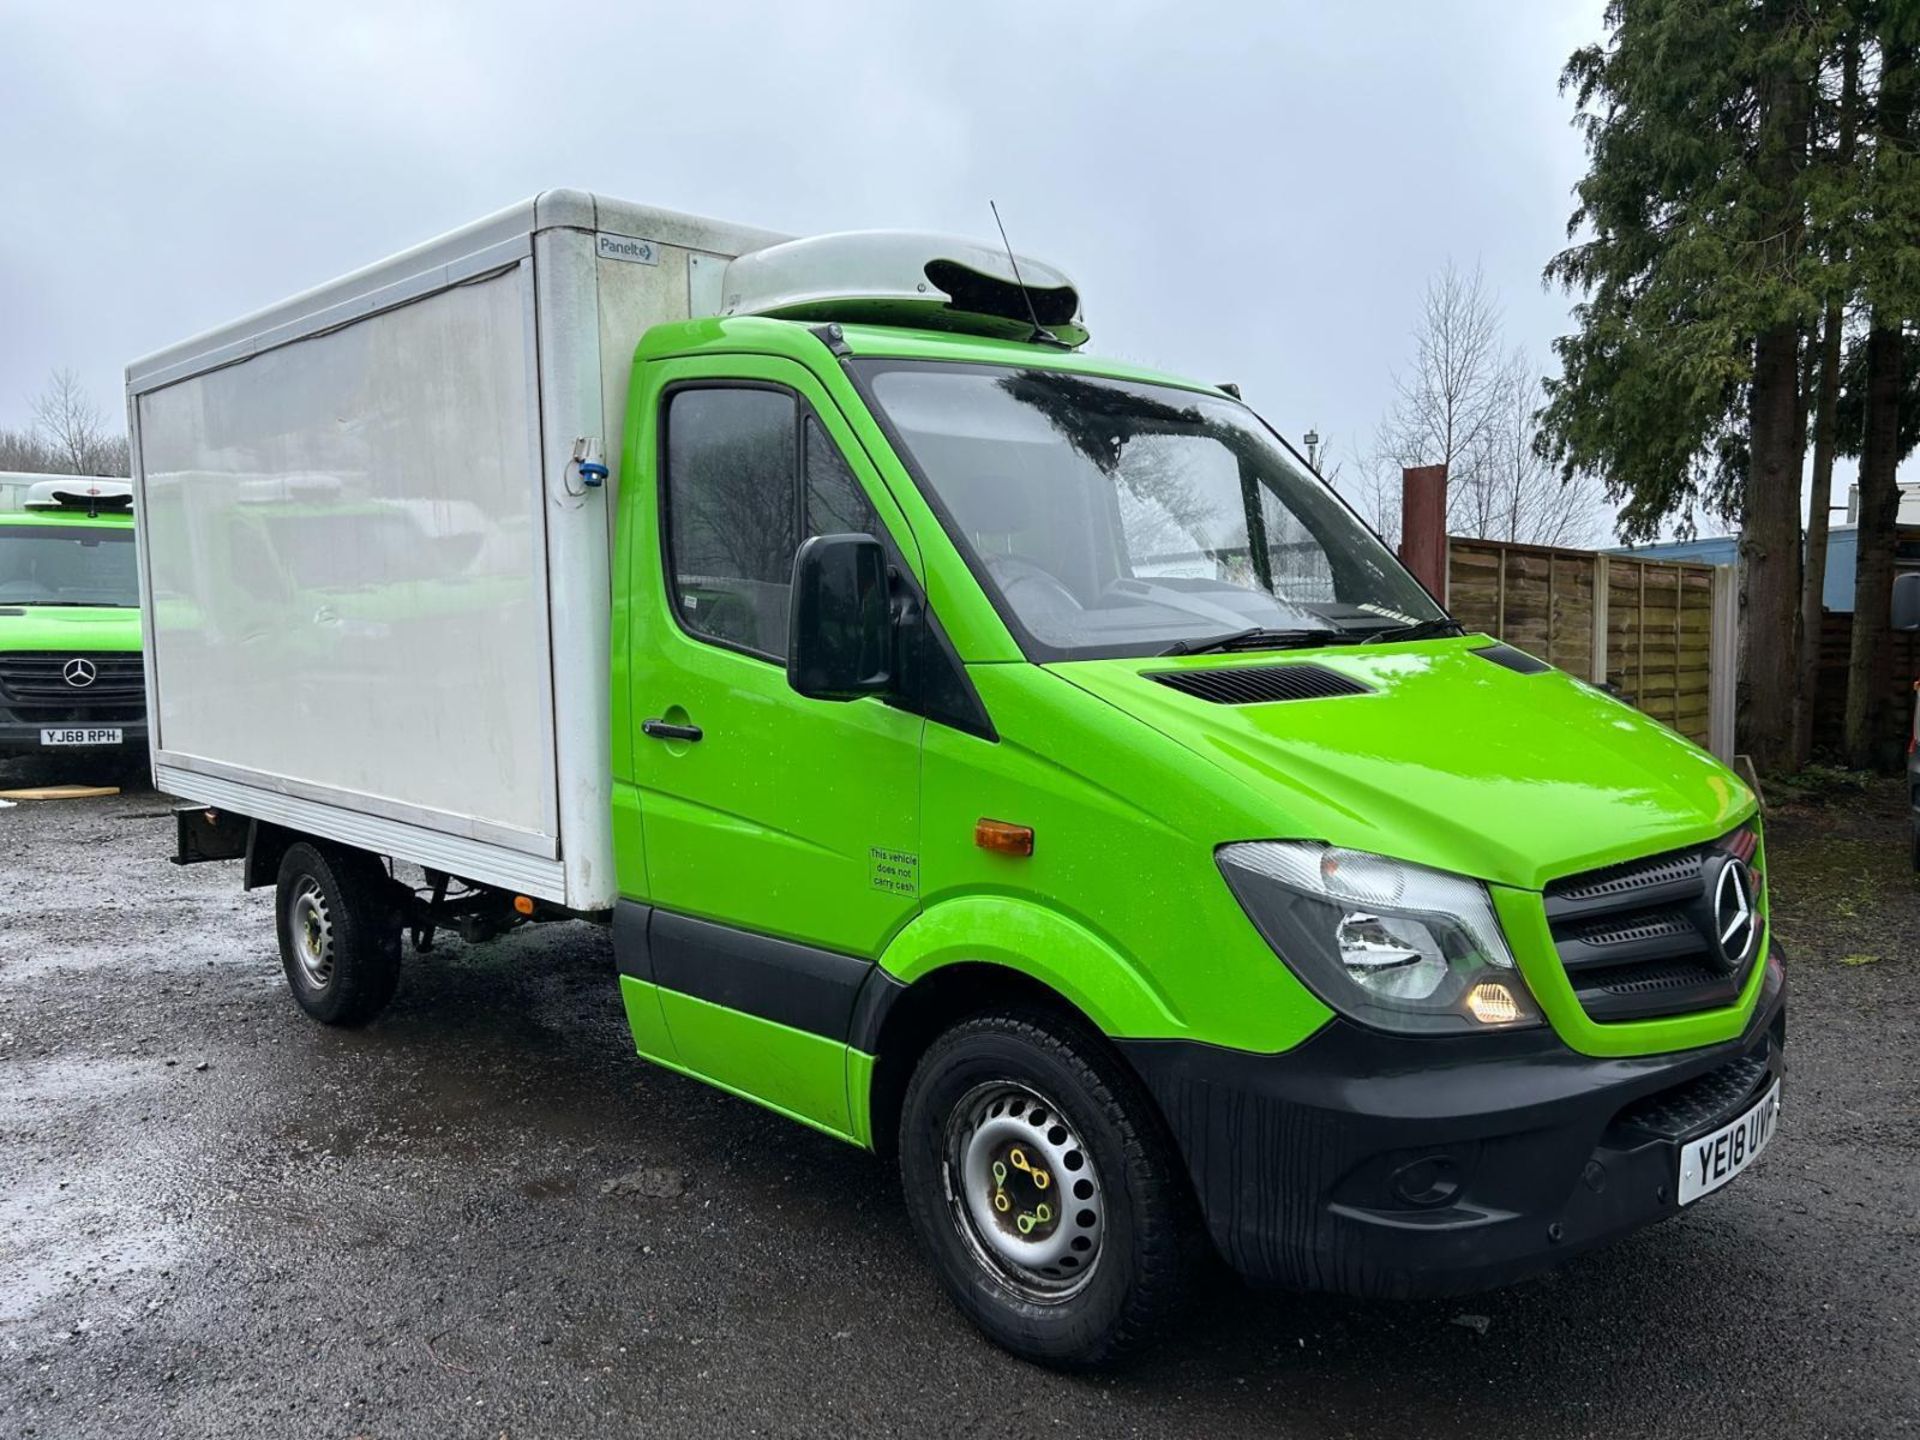 2018 MERCEDES-BENZ SPRINTER 314 CDI FRIDGE FREEZER CHASSIS CAB READY FOR YOUR BUSINES!